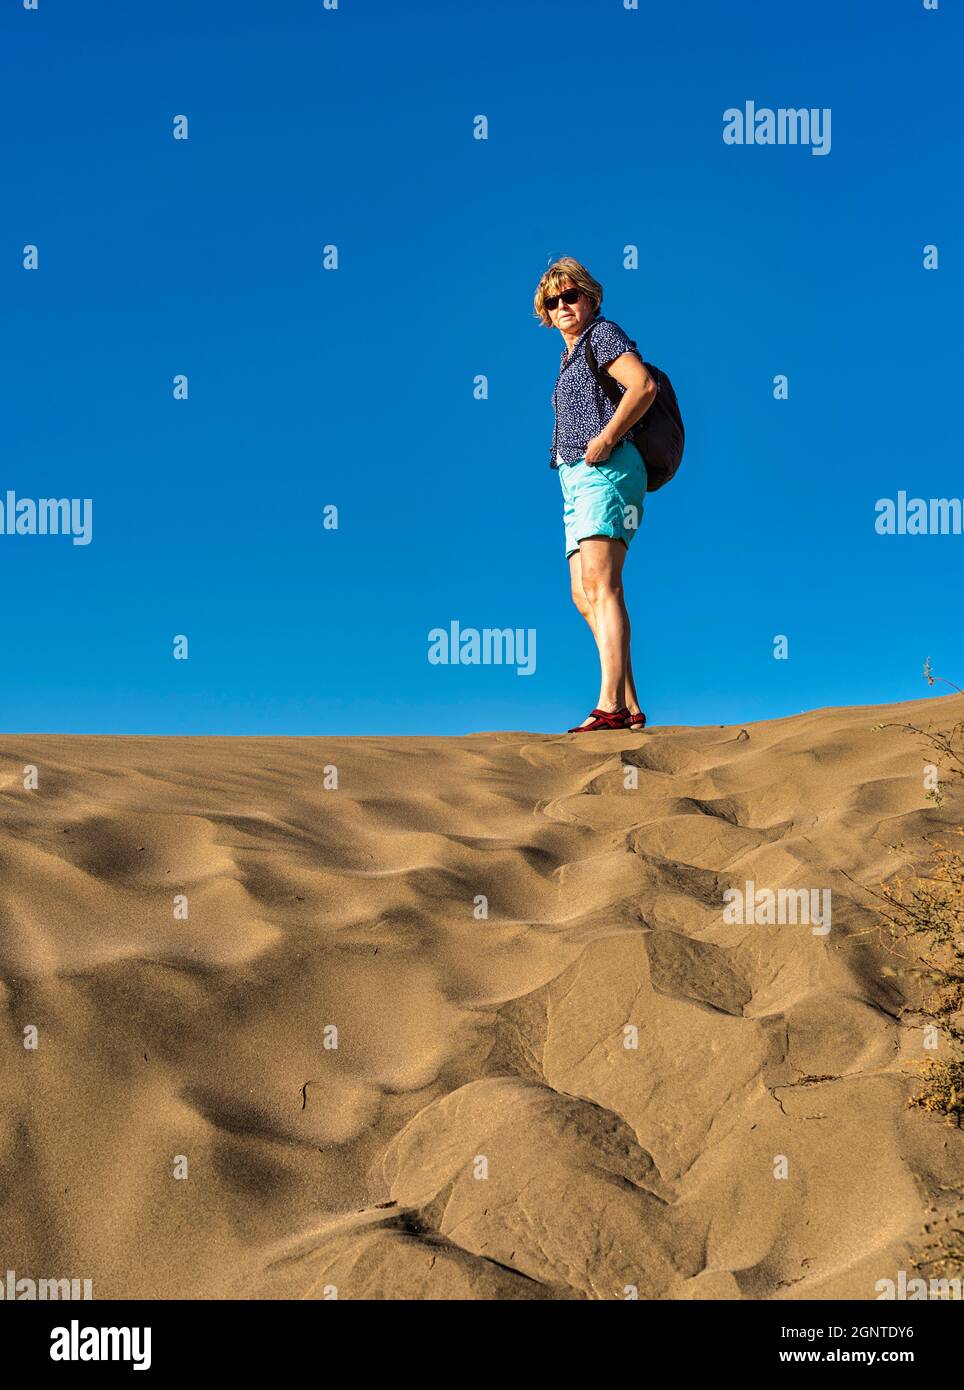 A single woman standing on the sand dunes in Canary Islands Stock Photo